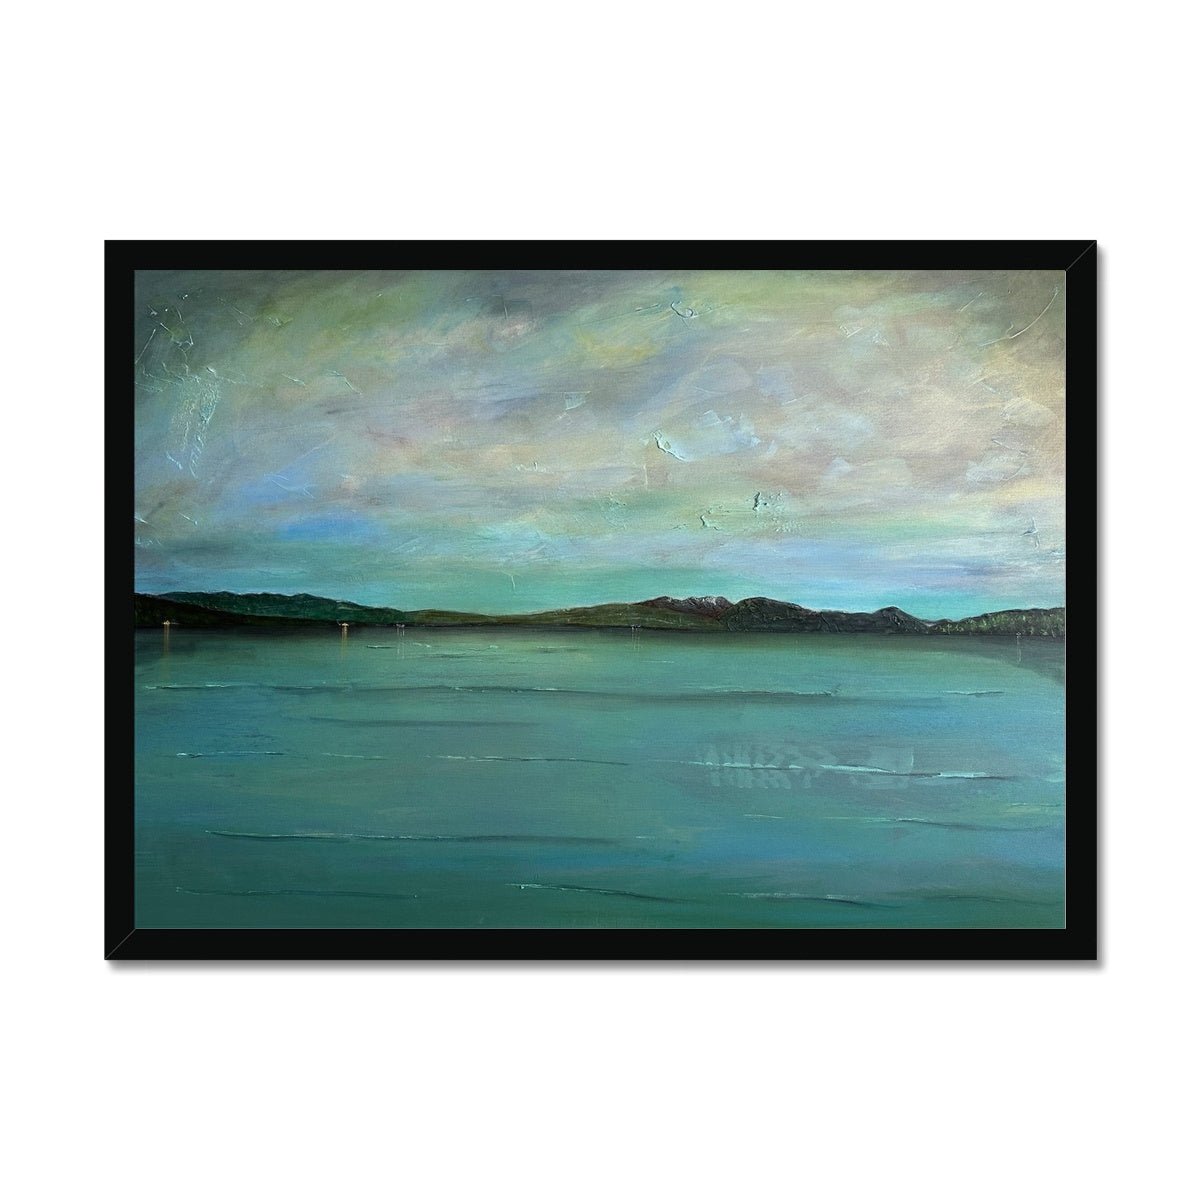 An Emerald Loch Lomond Painting | Framed Prints From Scotland-Framed Prints-Scottish Lochs & Mountains Art Gallery-A2 Landscape-Black Frame-Paintings, Prints, Homeware, Art Gifts From Scotland By Scottish Artist Kevin Hunter